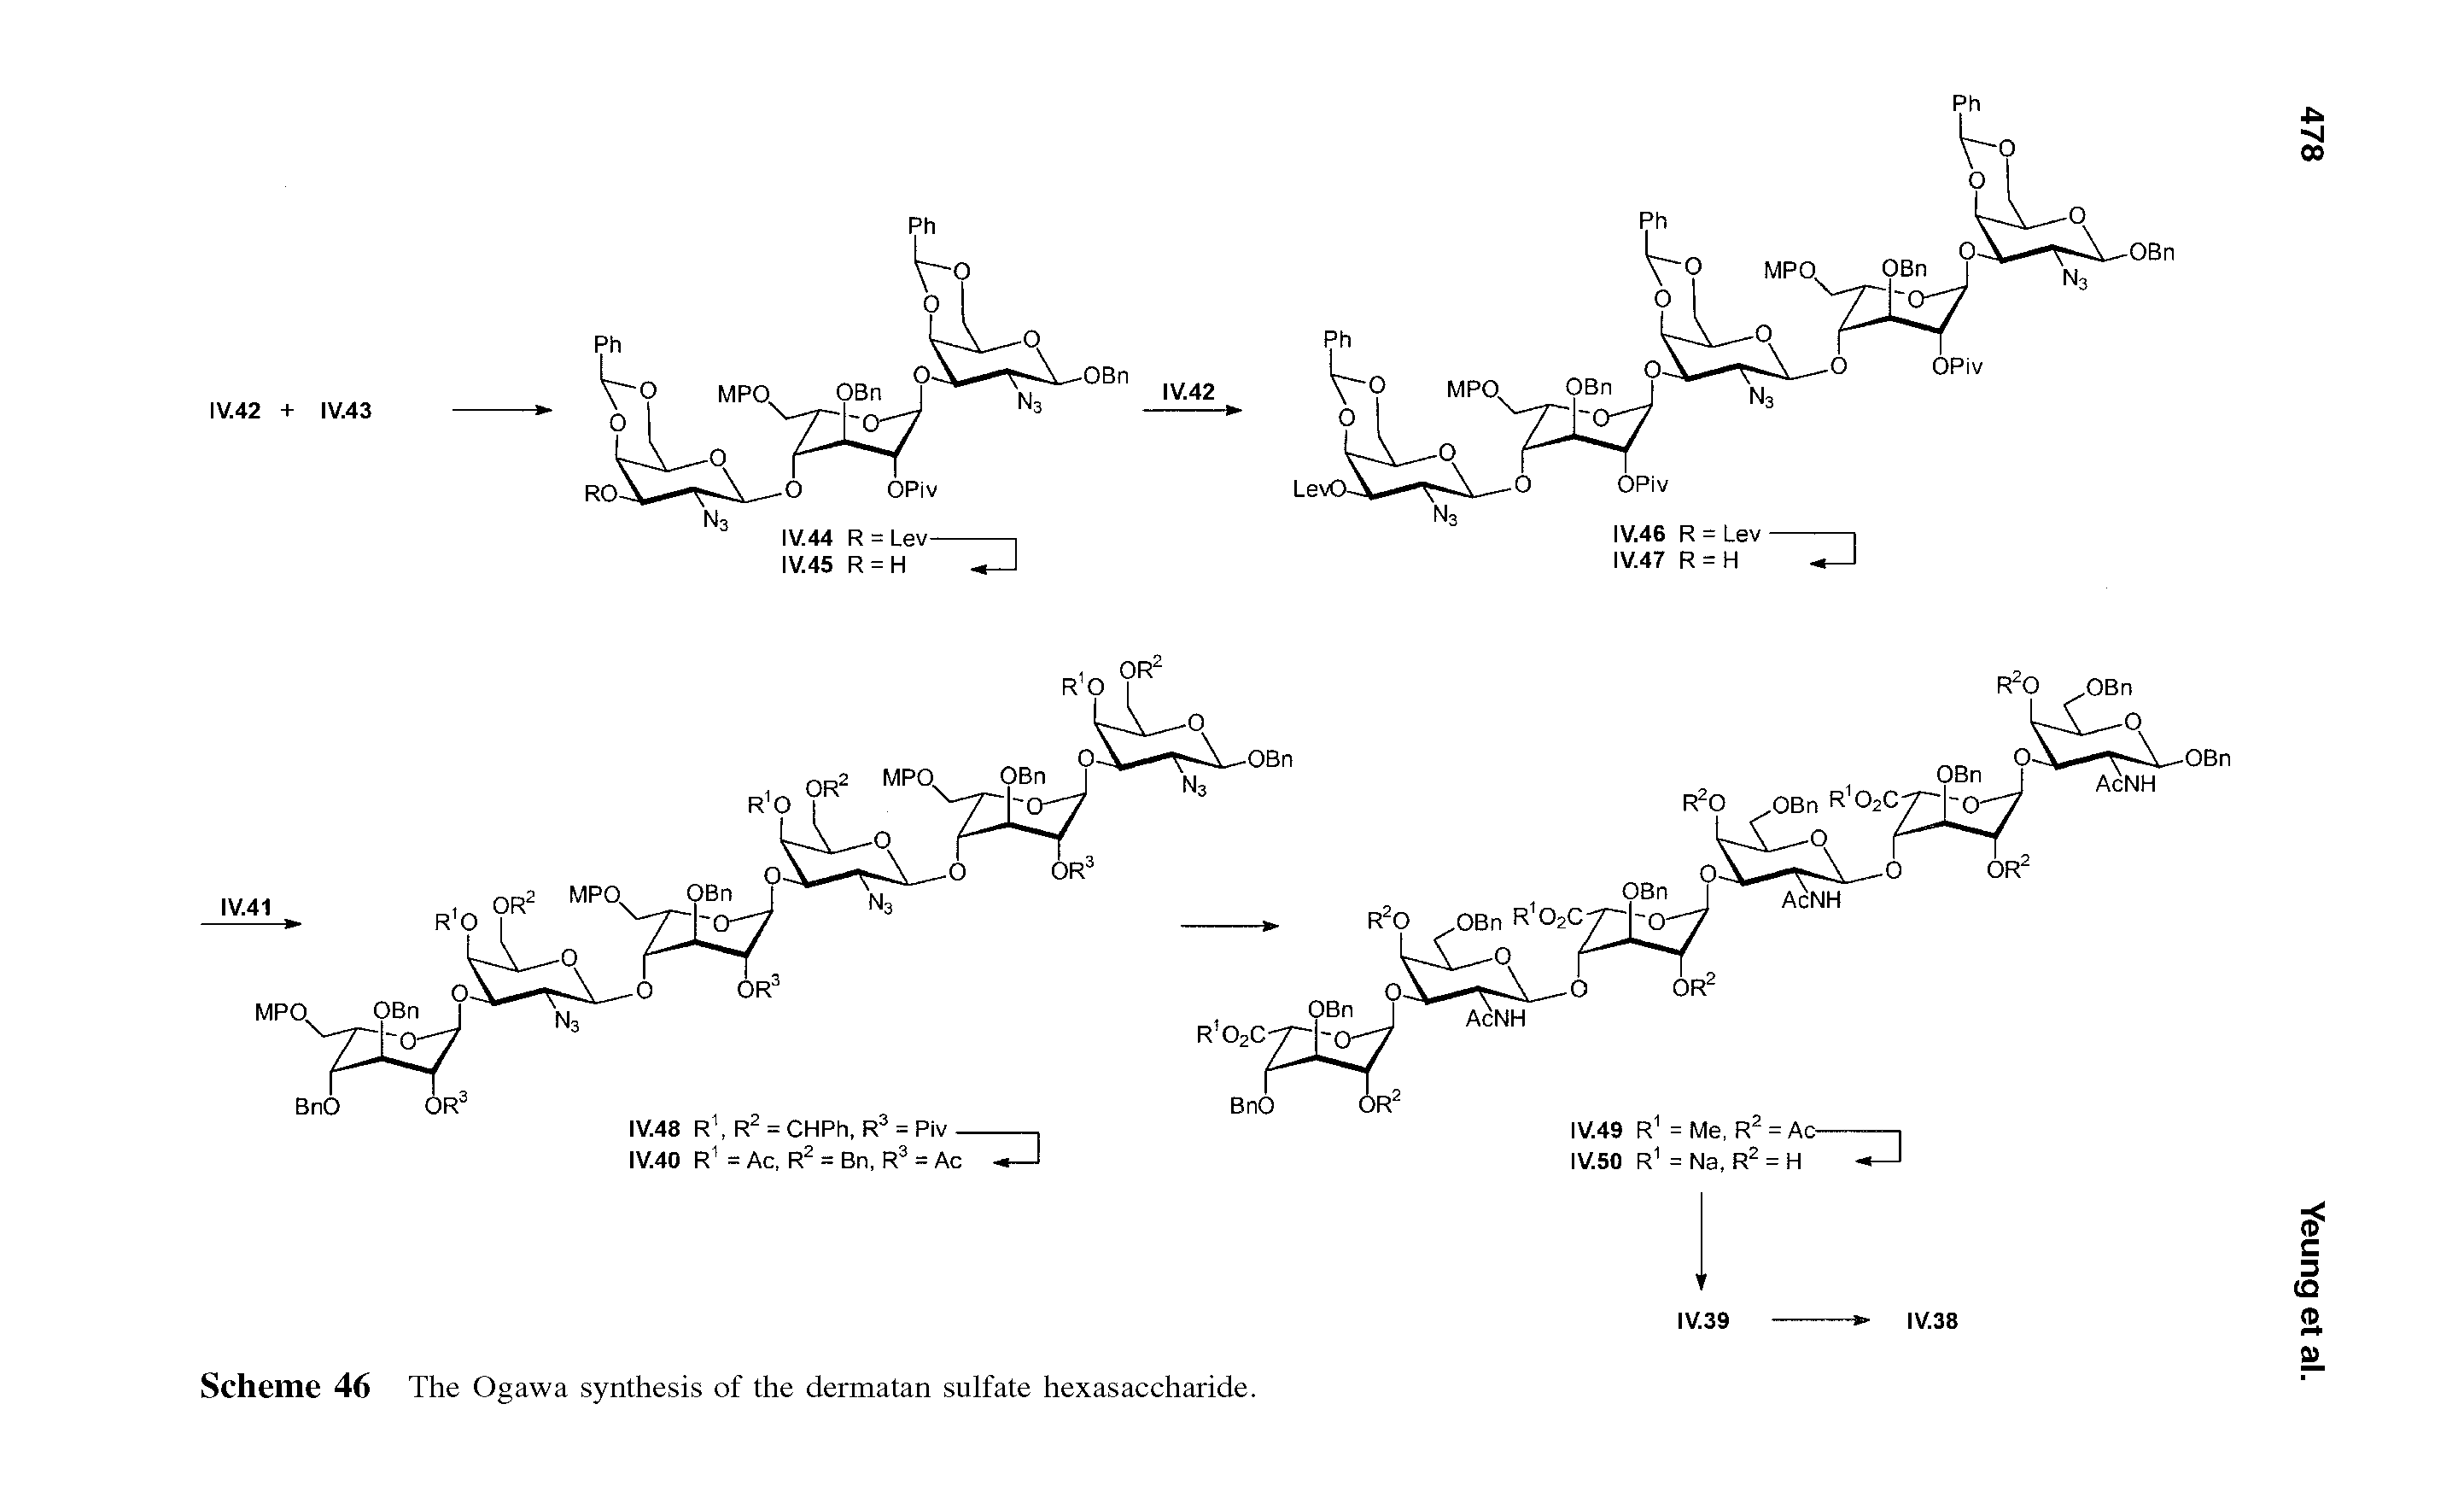 Scheme 46 The Ogawa synthesis of the dermatan sulfate hexasaccharide.